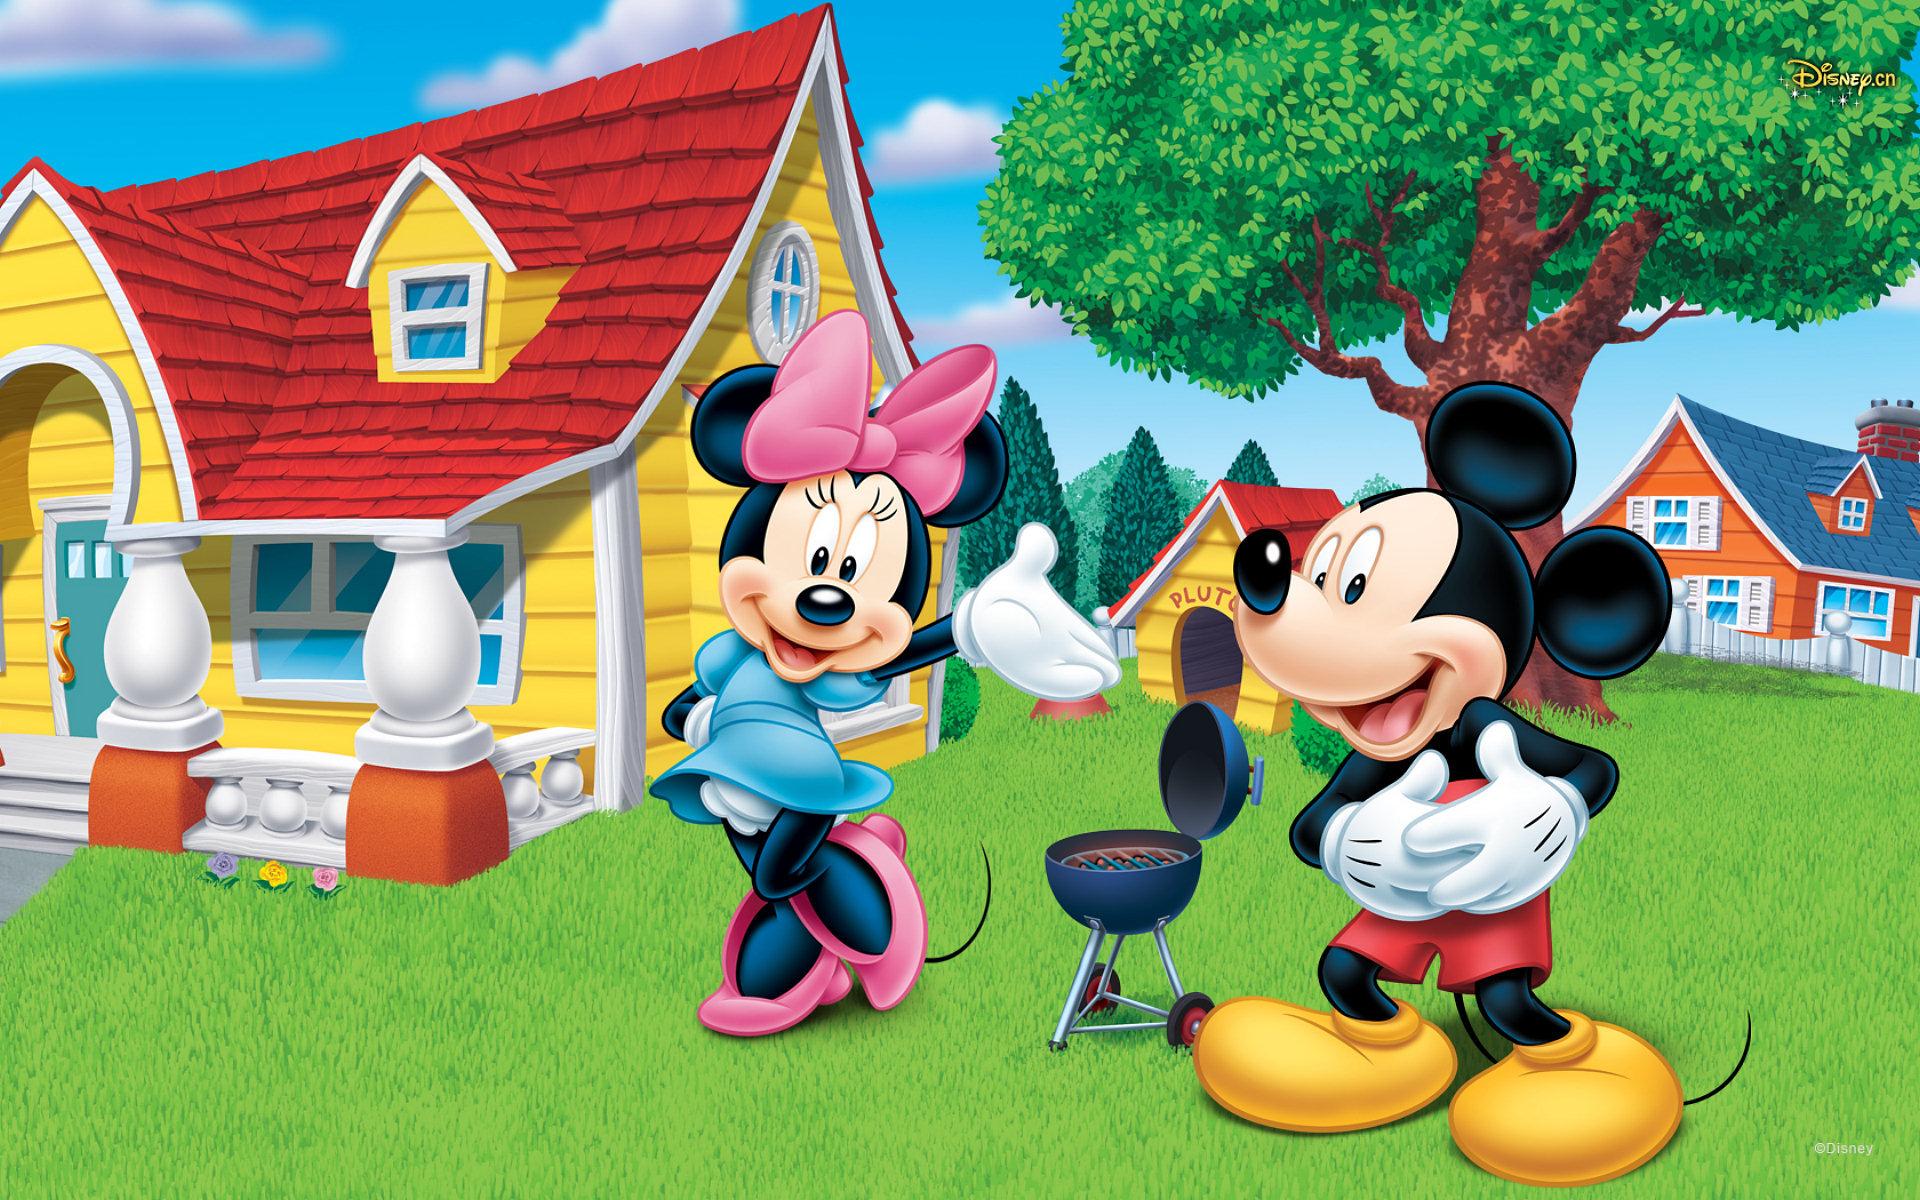 Mickey And Minnie wallpaper HD for desktop background